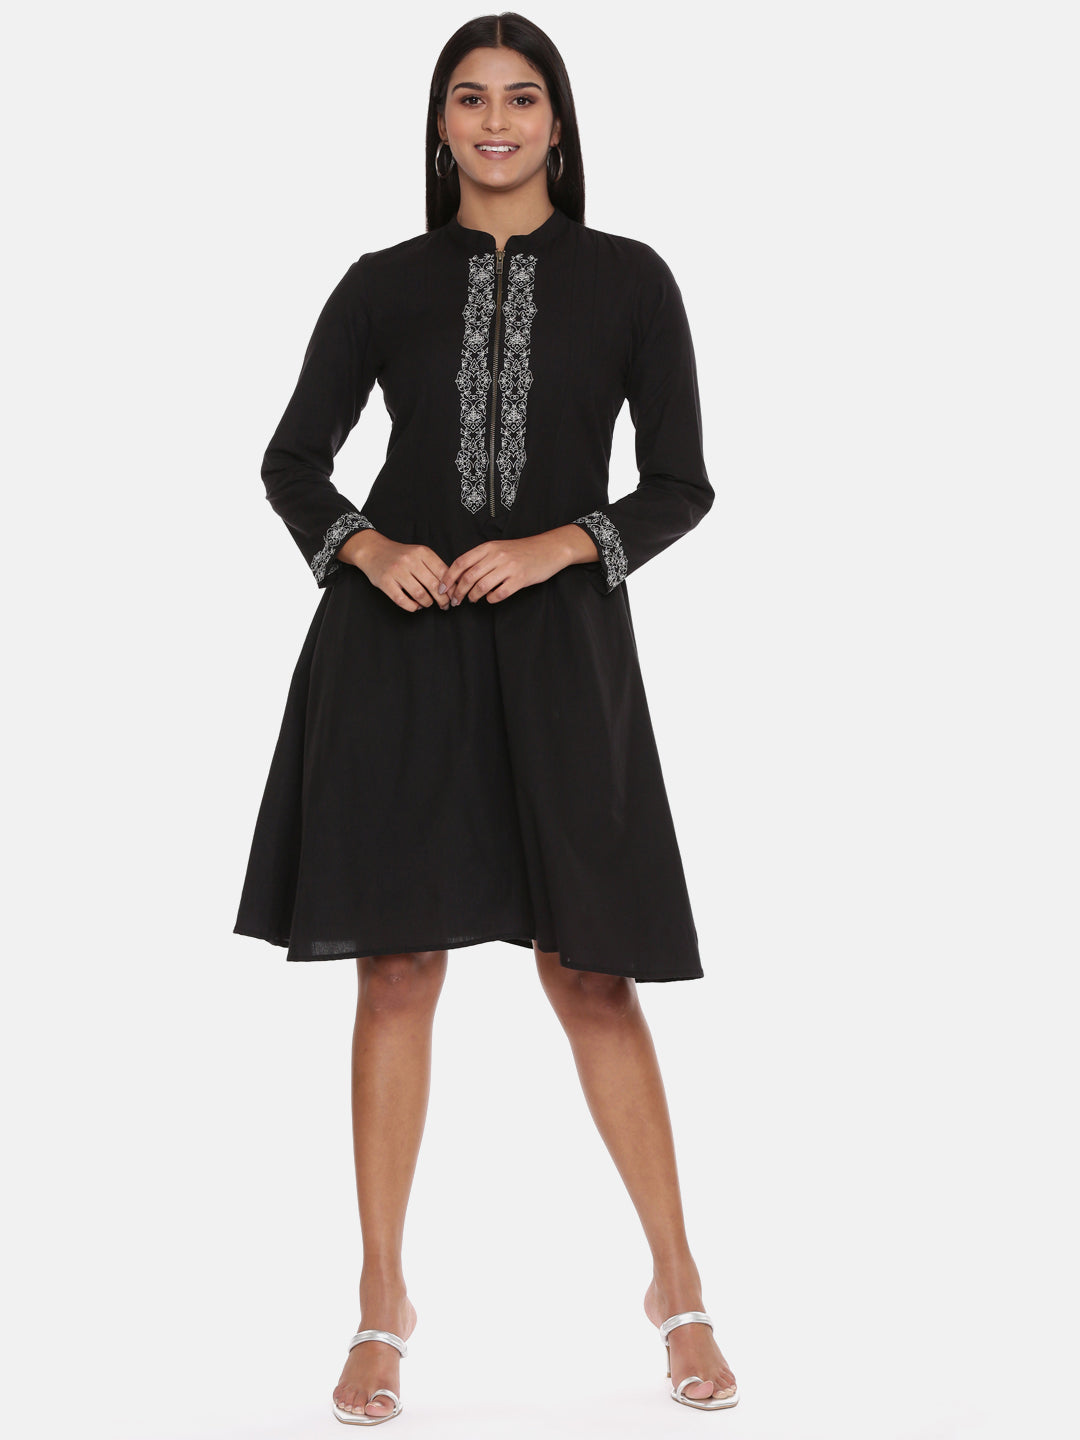 Black Cotton Embroidered Dress - AS0628